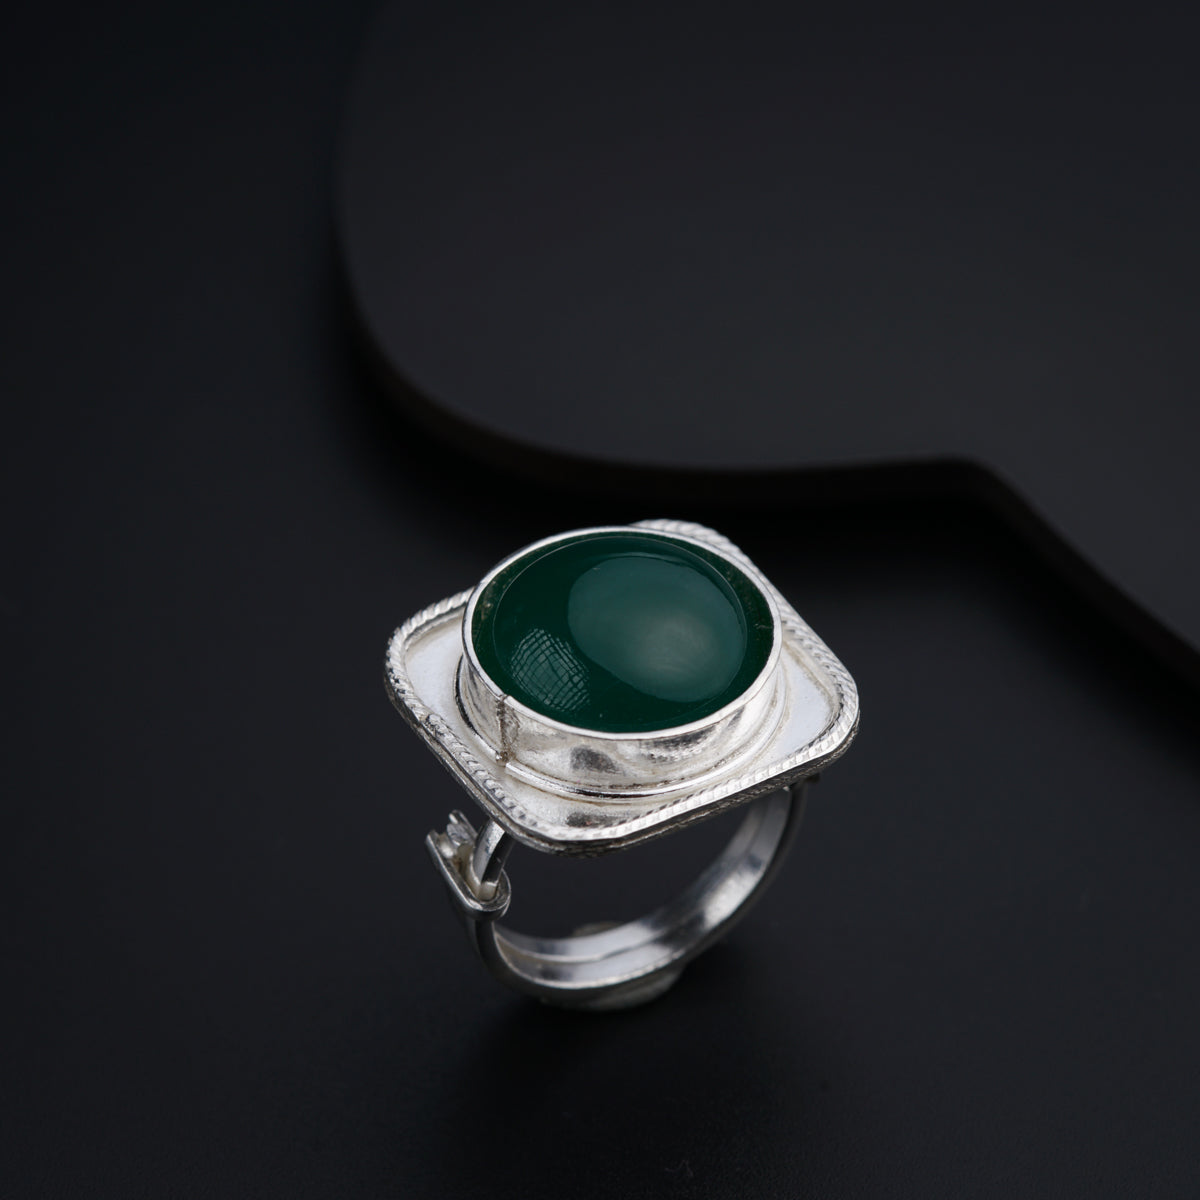 Grand Emerald Ring in 14k Gold (May)